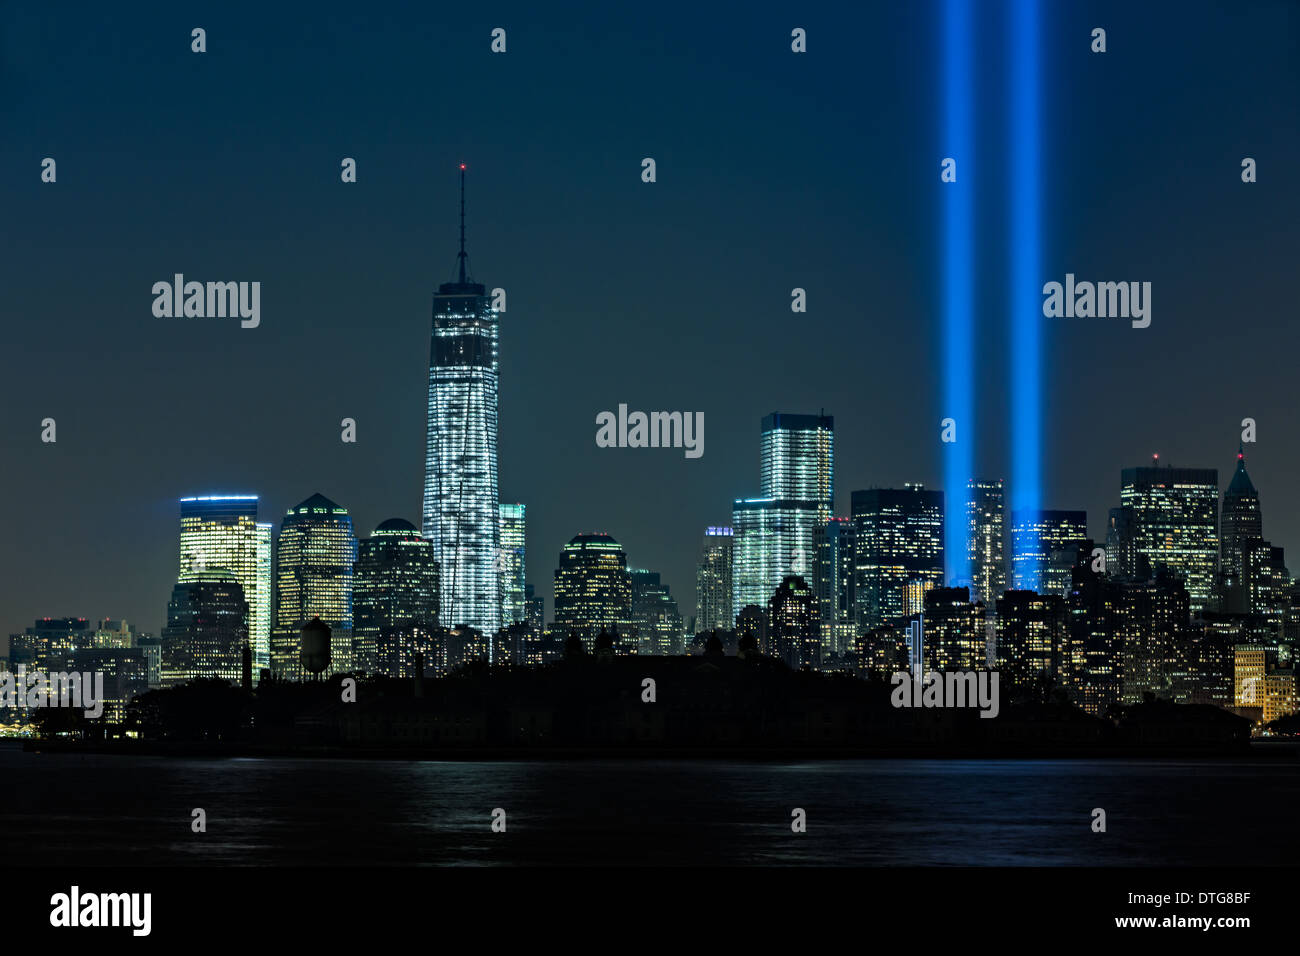 Tribute In Light 2013 at the New York City Skyline alongside the Freedom Tower located at One World Trade Center. Stock Photo